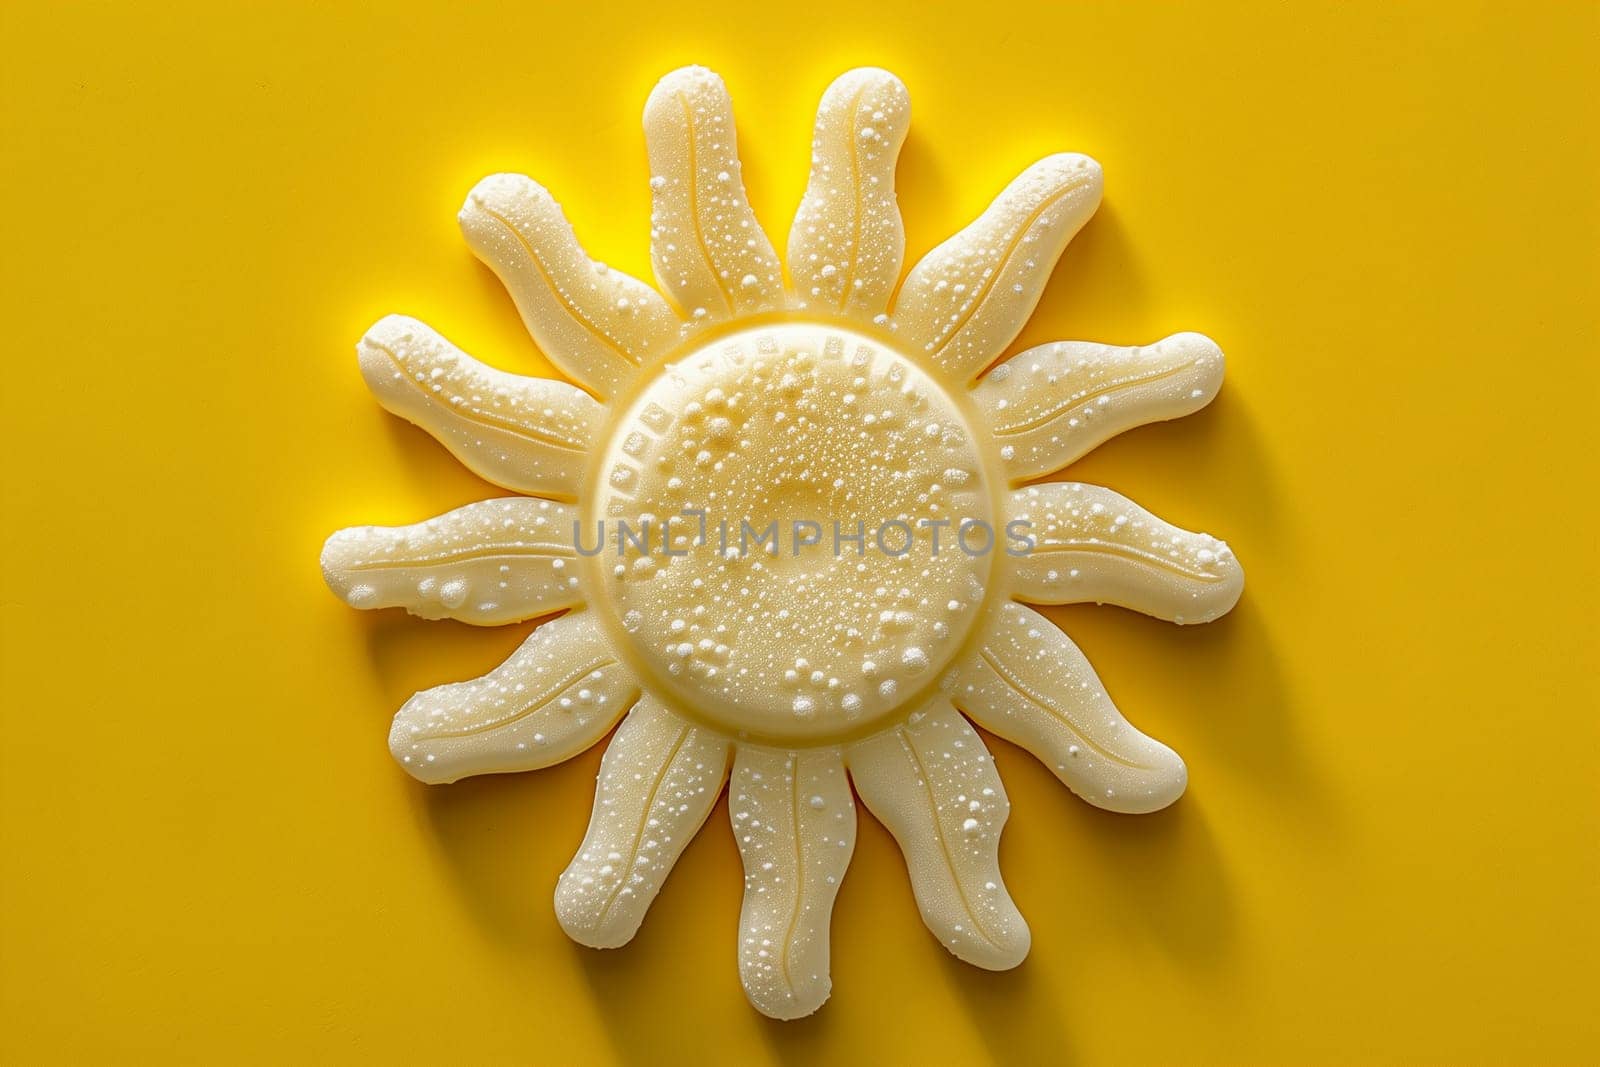 A close-up image of a white cream sun on a yellow background. The sun is made of a white cream, and it has a swirly texture. The background is yellow and has a painted texture.